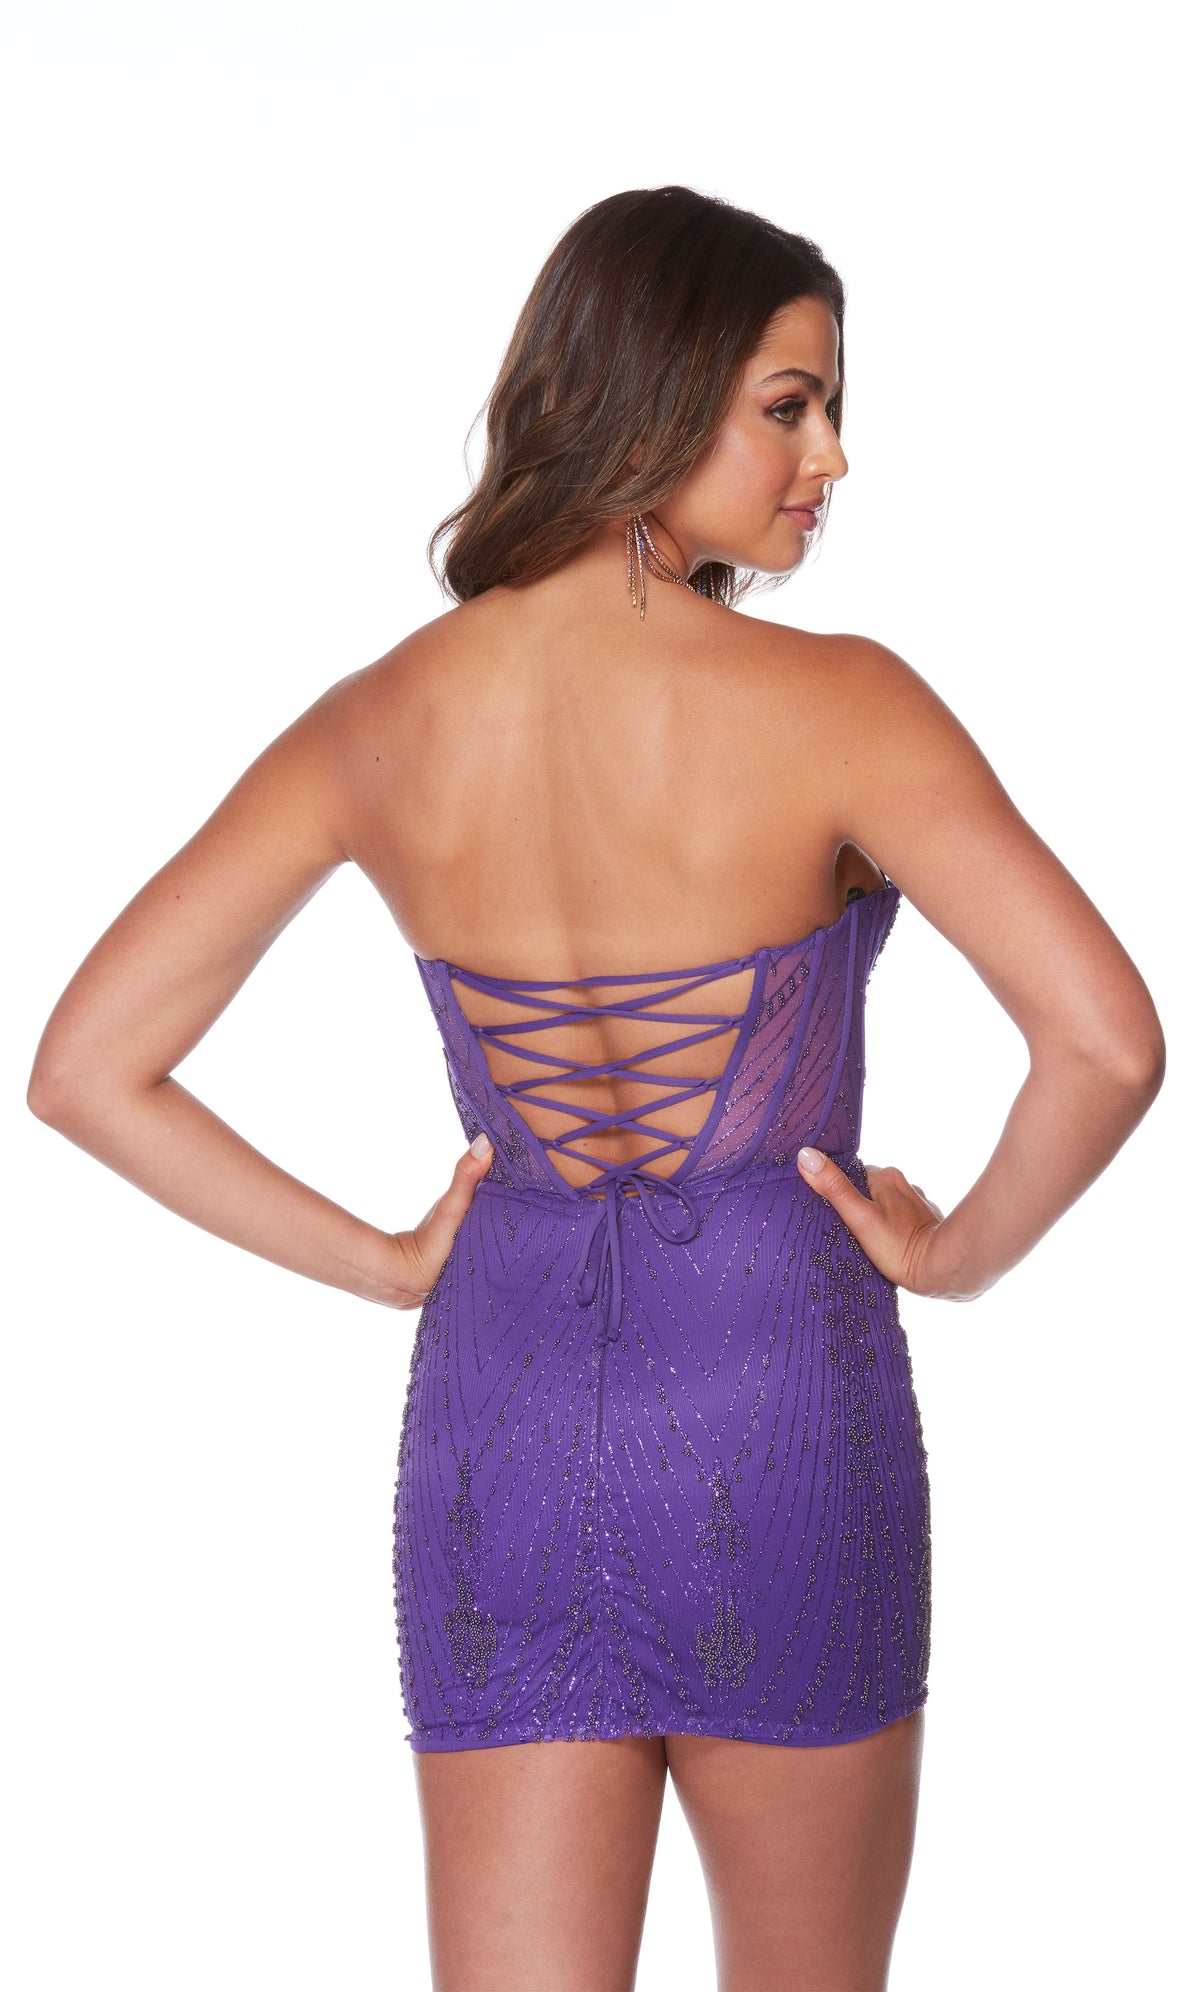 A purple short corset dress spotlighting a strapless sweetheart neckline, sheer bodice, and glitter embellishments throughout. The back of the dress has a lace-up back for a custom fit.